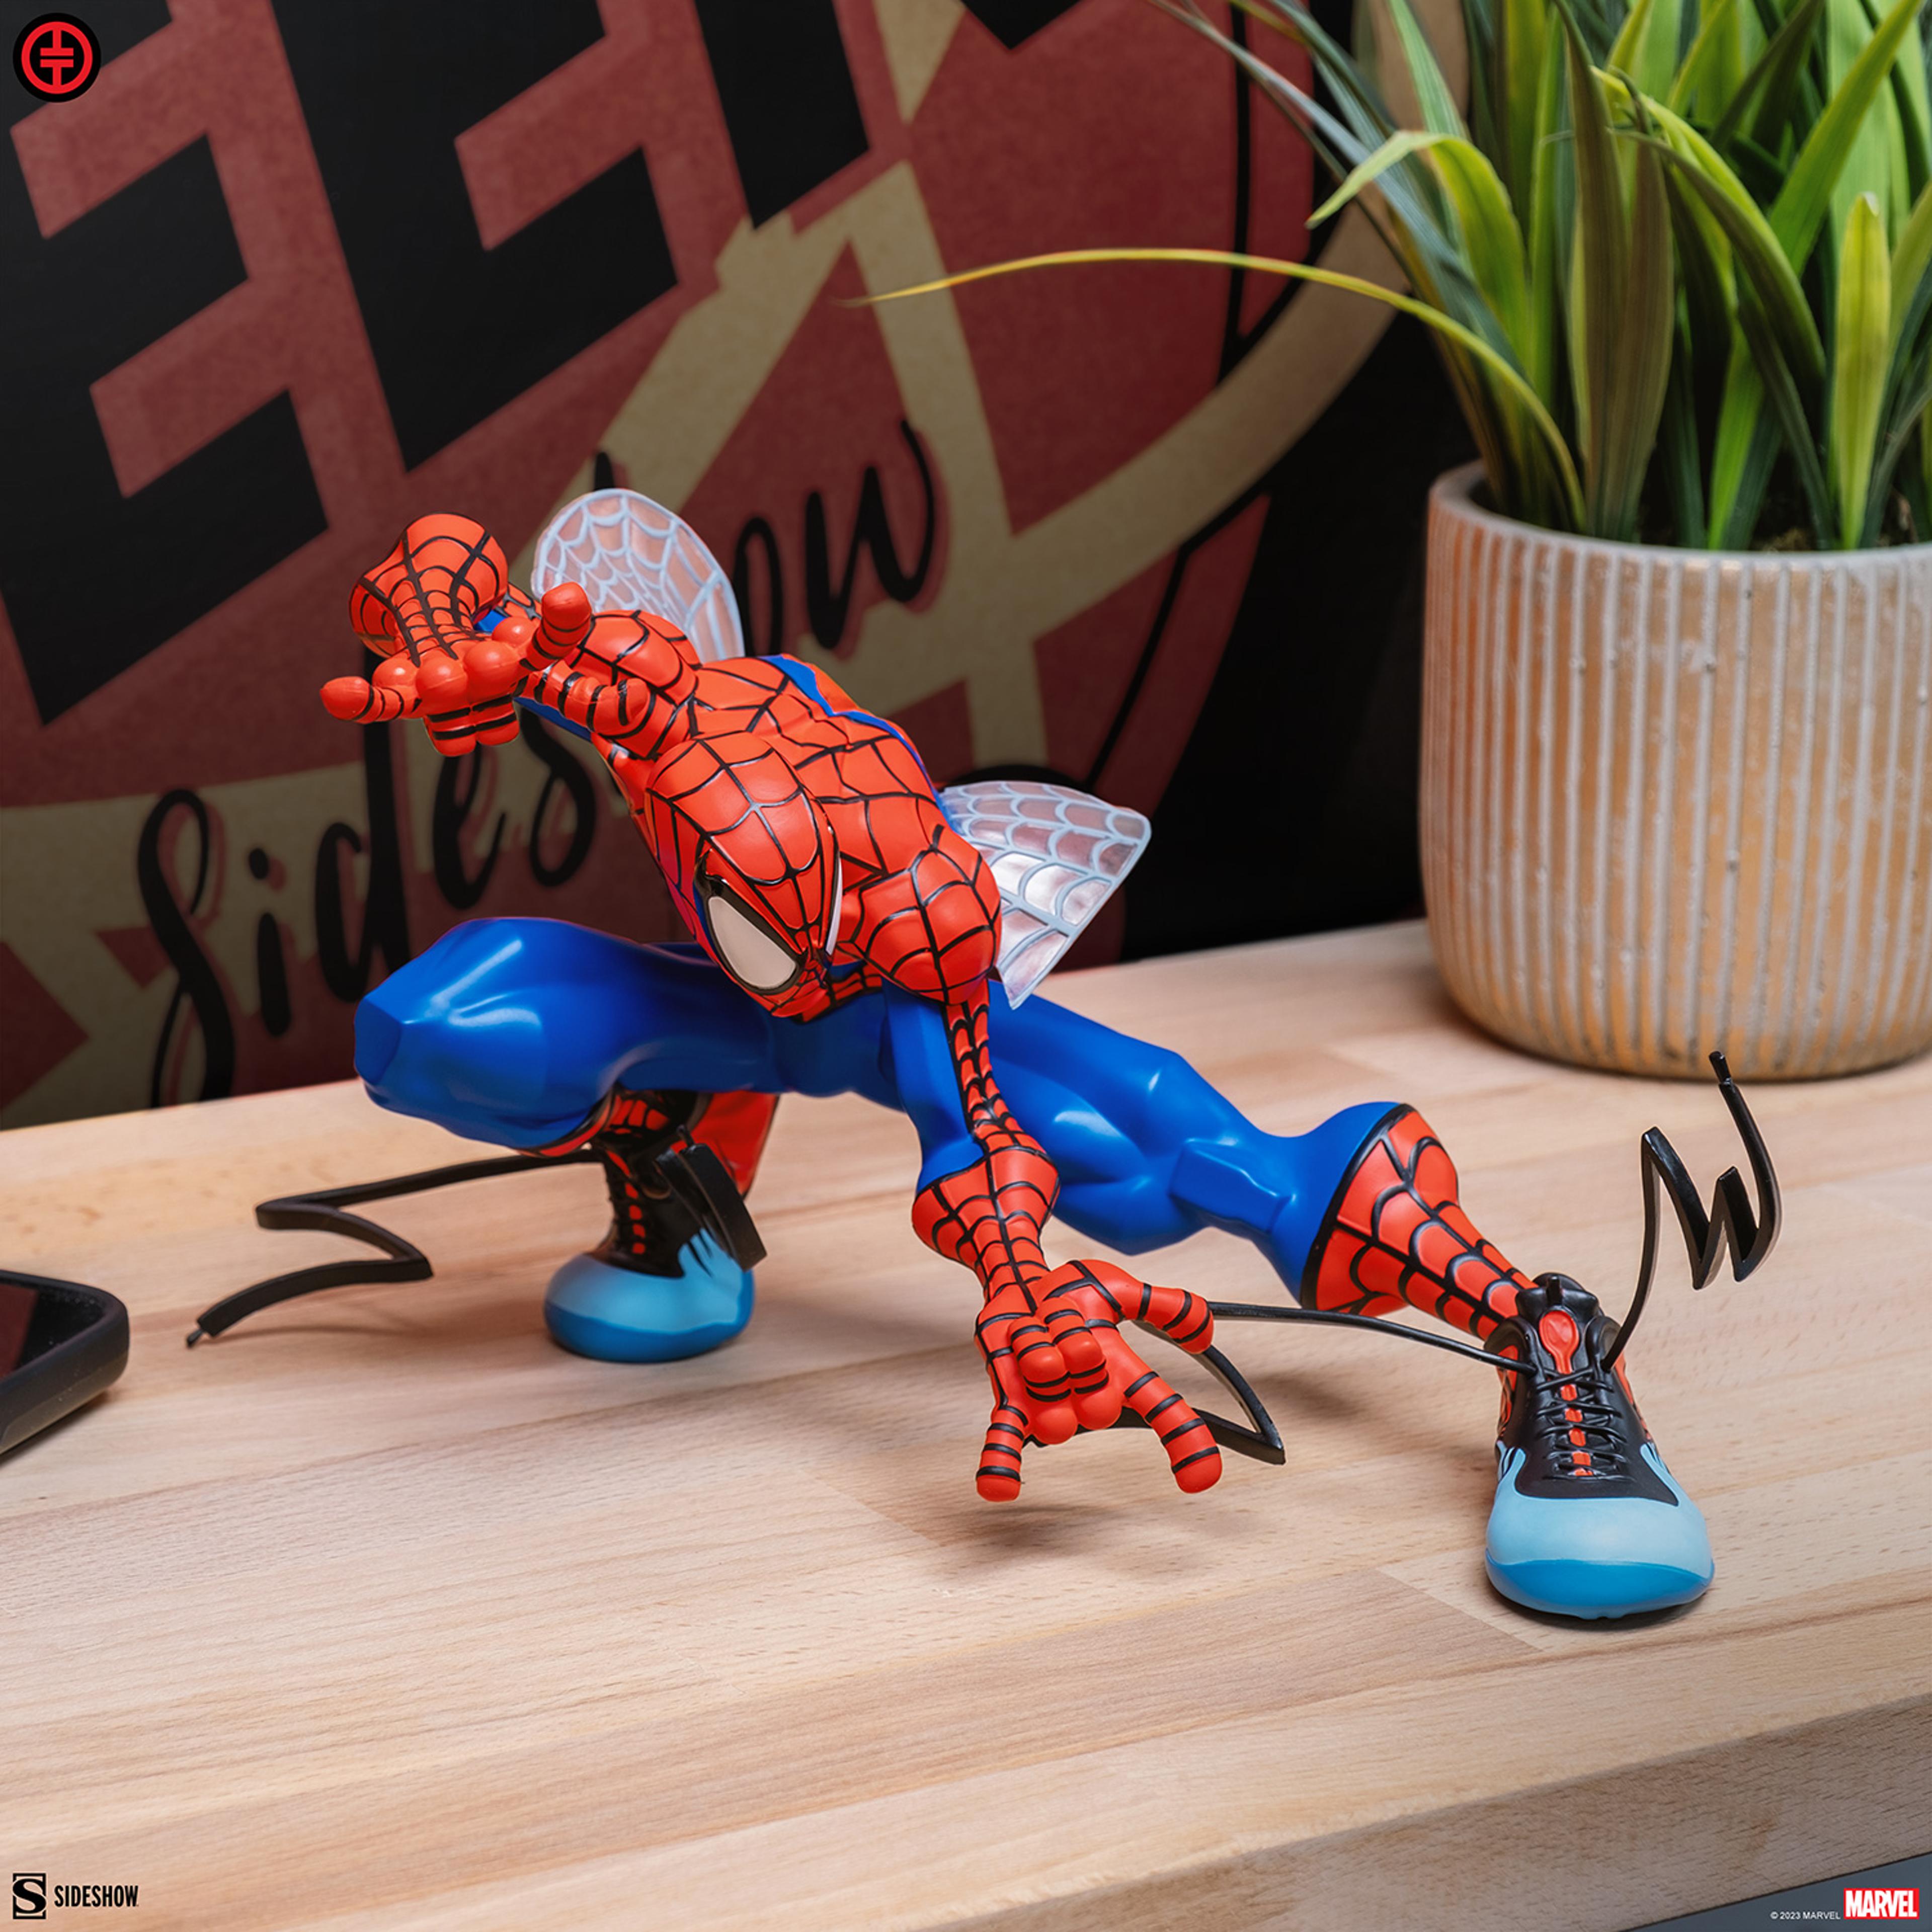 SPIDER-MAN Designer Collectible Statue by Unruly Industries™